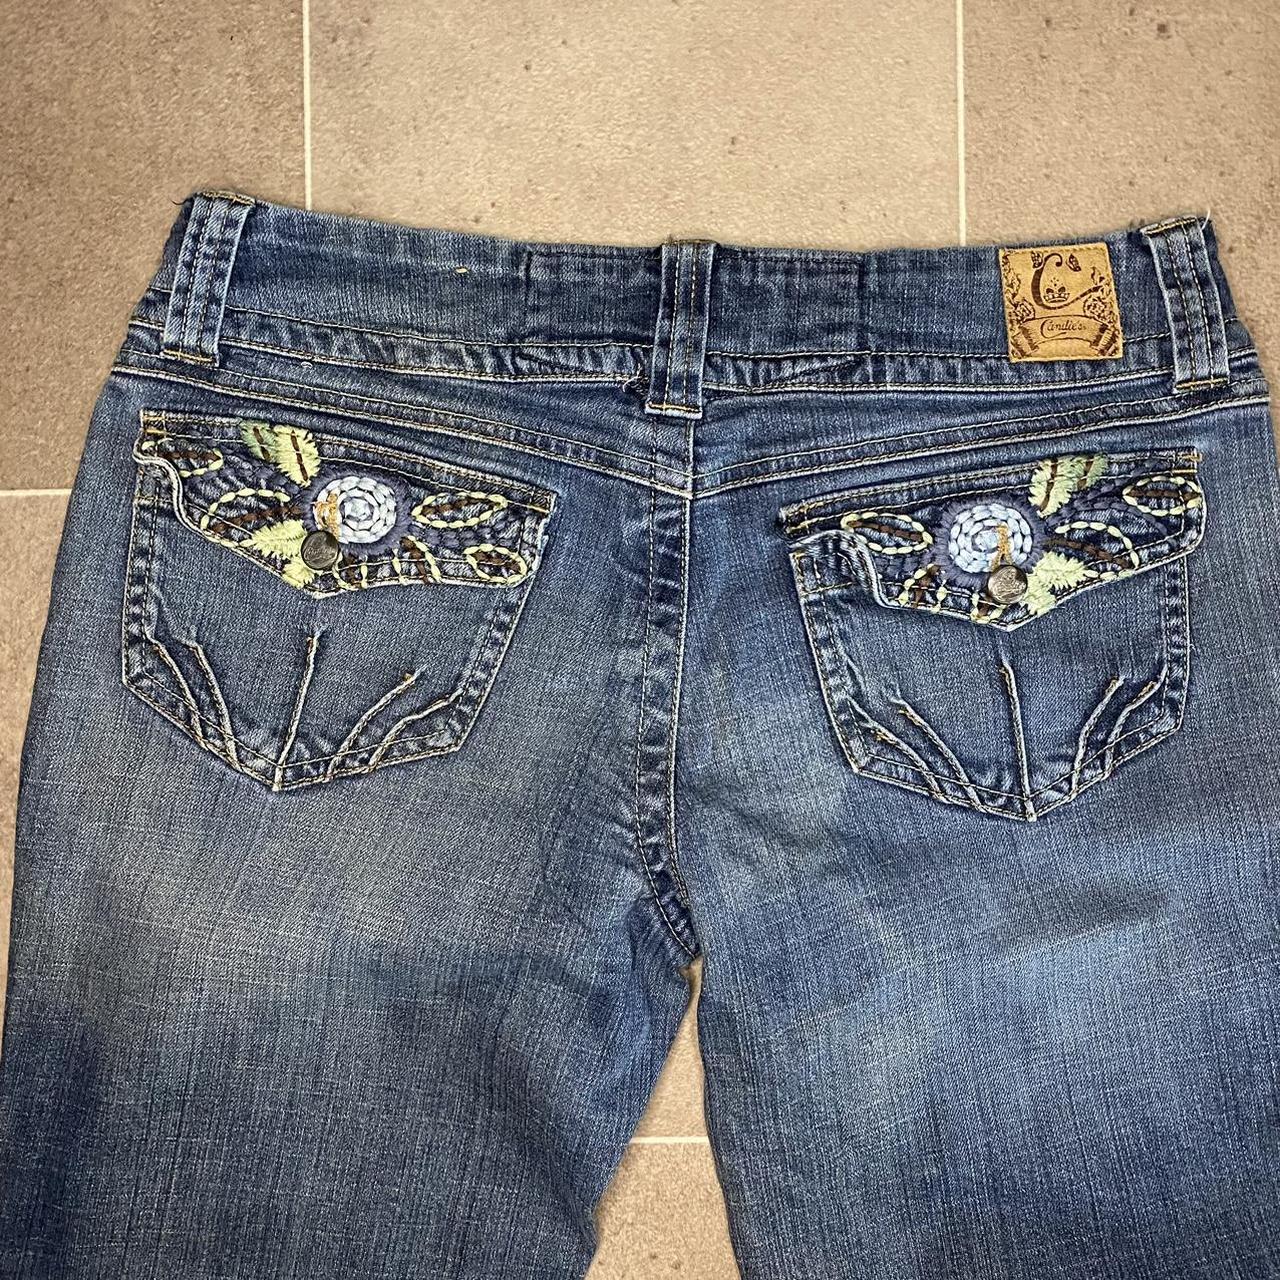 Candie's Women's Green and Blue Jeans | Depop